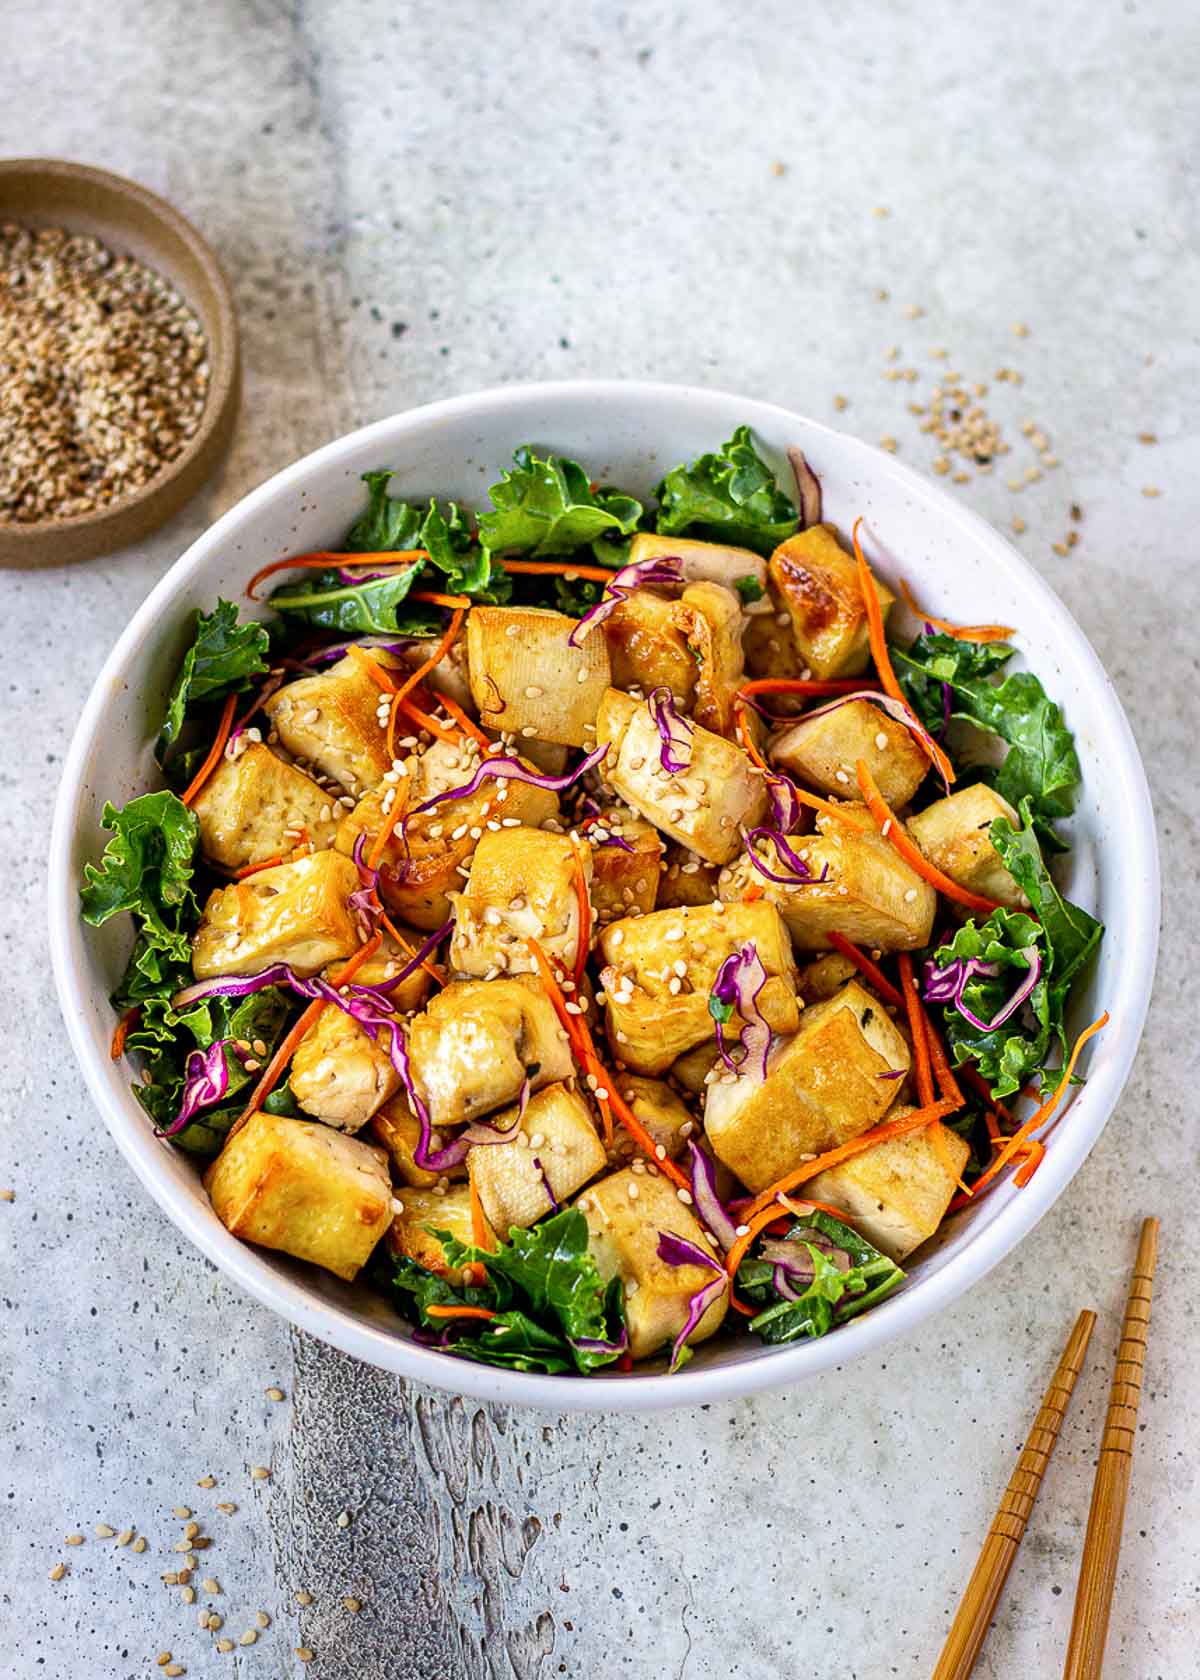 Bowl of healthy tofu surrounded by green leaves, red cabbage, carrots and a bowl of sesame seeds.